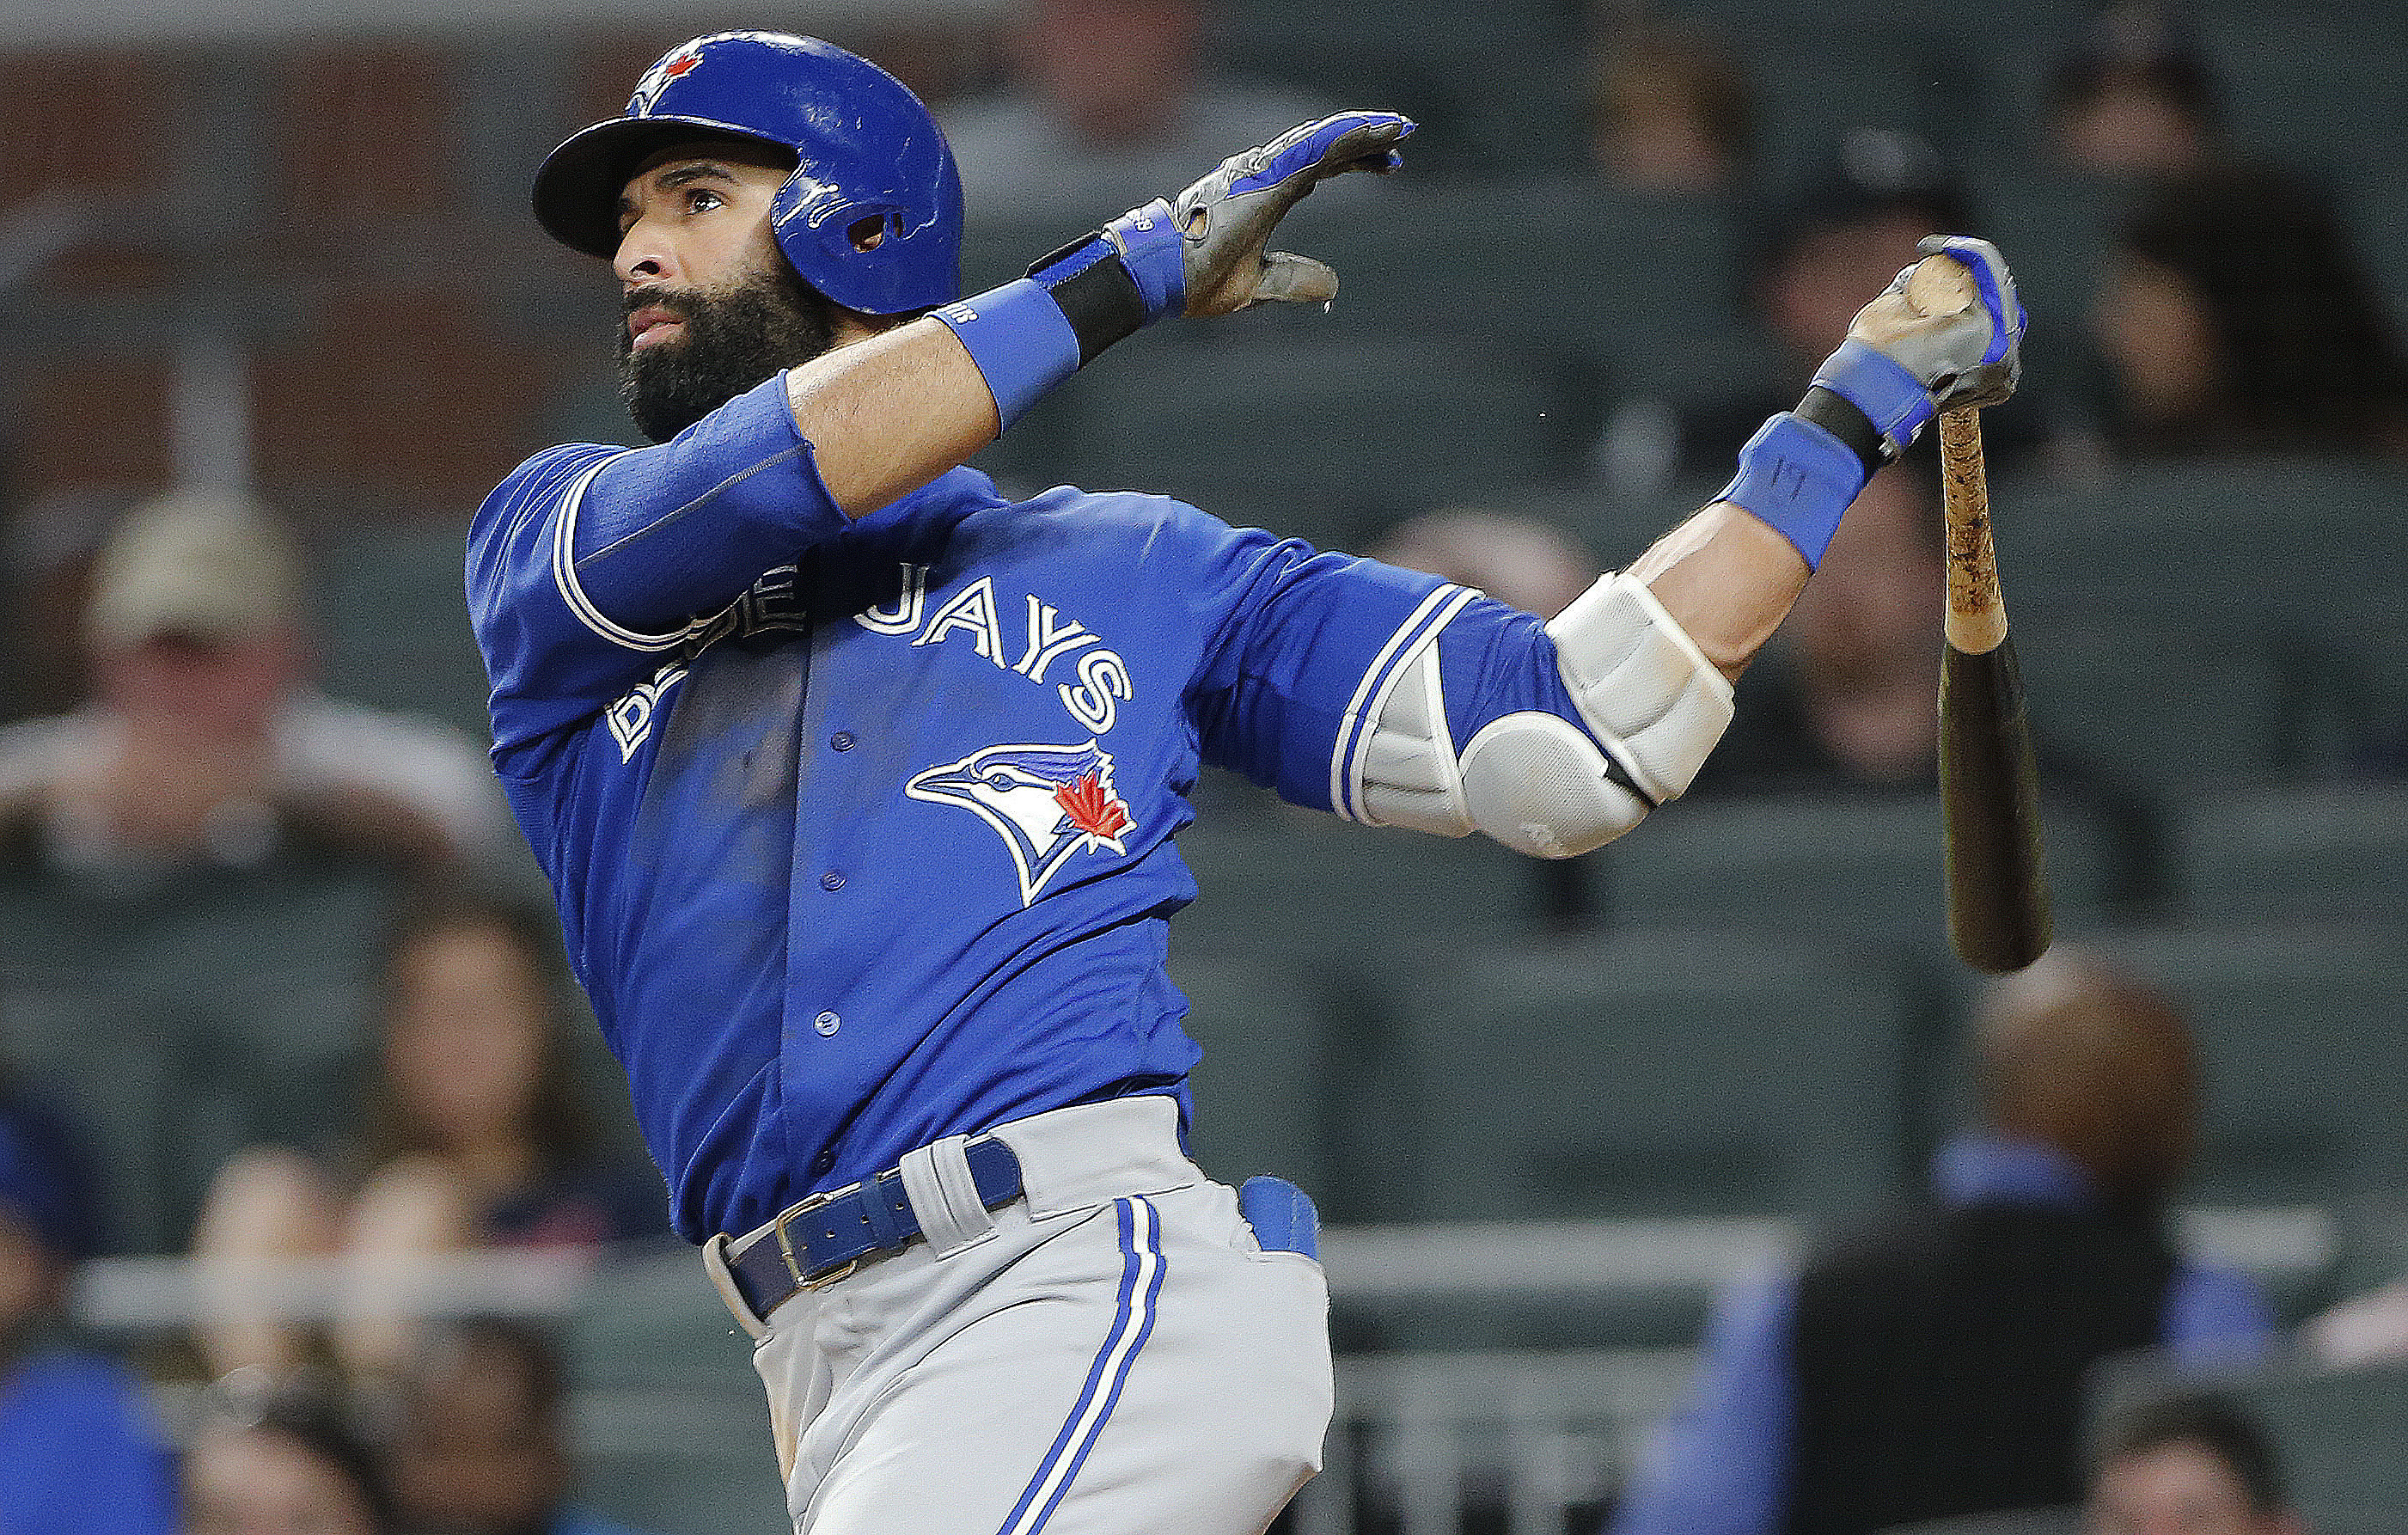 Jose Bautista will officially retire as a Toronto Blue Jay